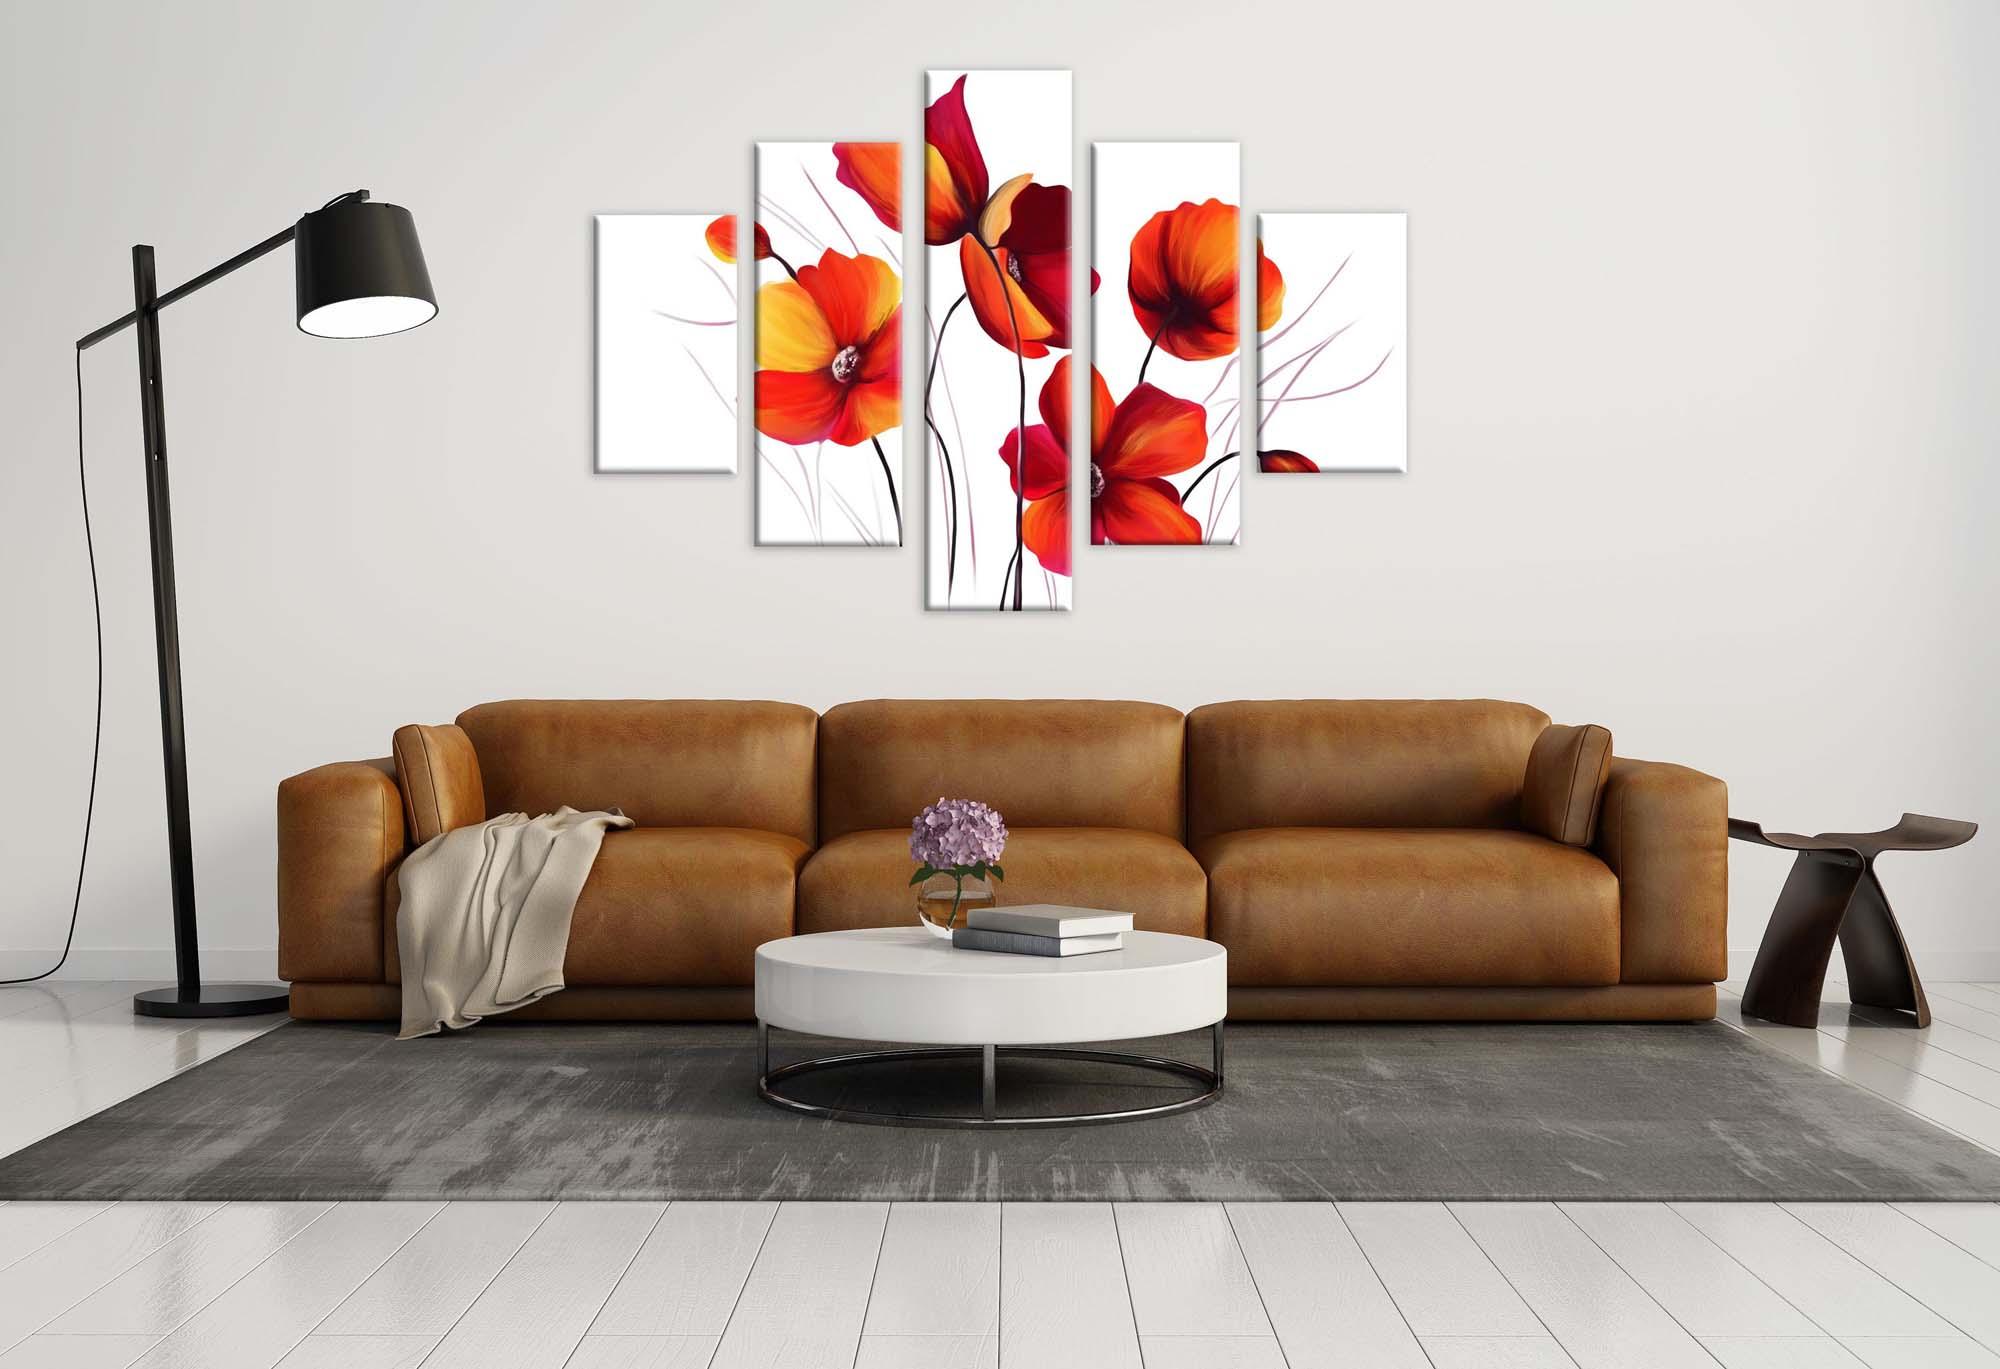 Picture Modular picture - poppies on a white background 2